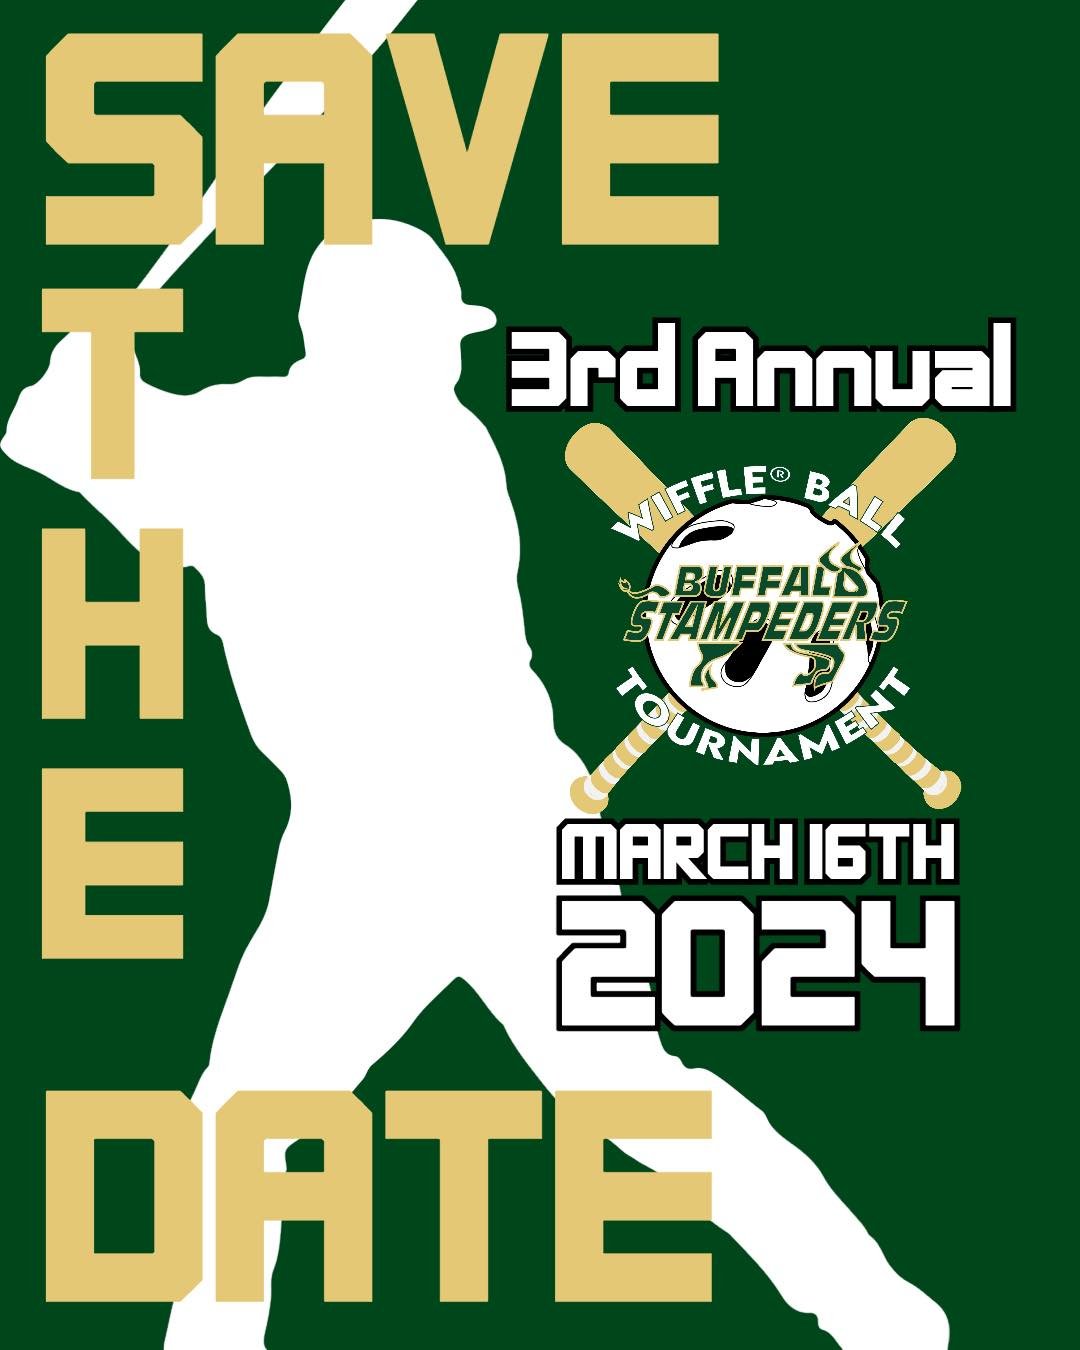 Save the Date for March 16, 2024: our 3rd Annual Wiffle Ball Tournament is taking place at The Villages High School. More info to follow soon!